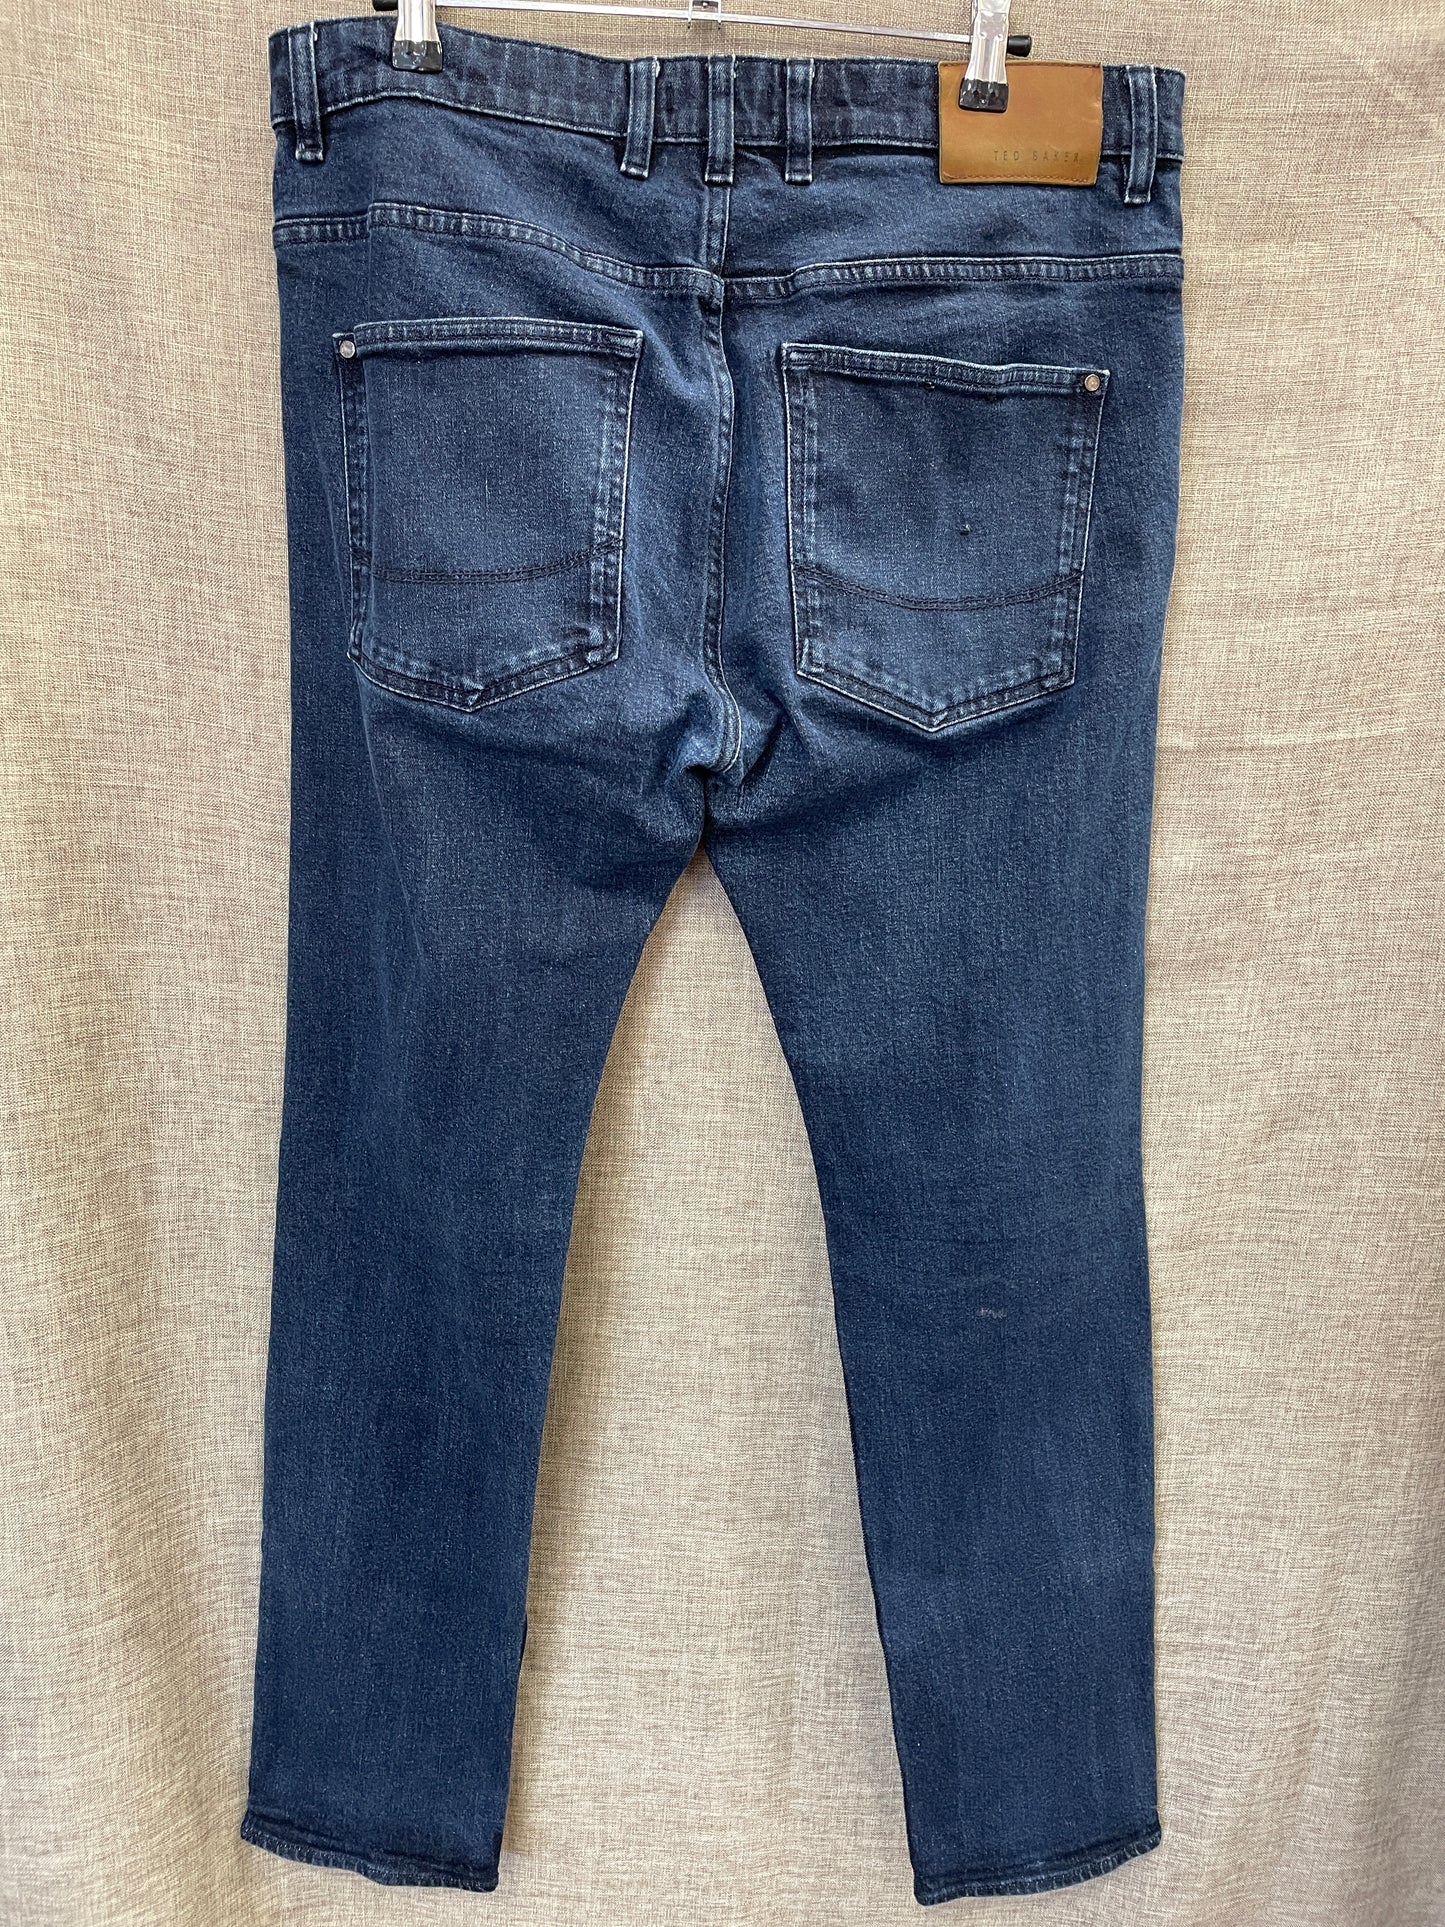 Ted Baker Straight Leg Jeans Size 34 R